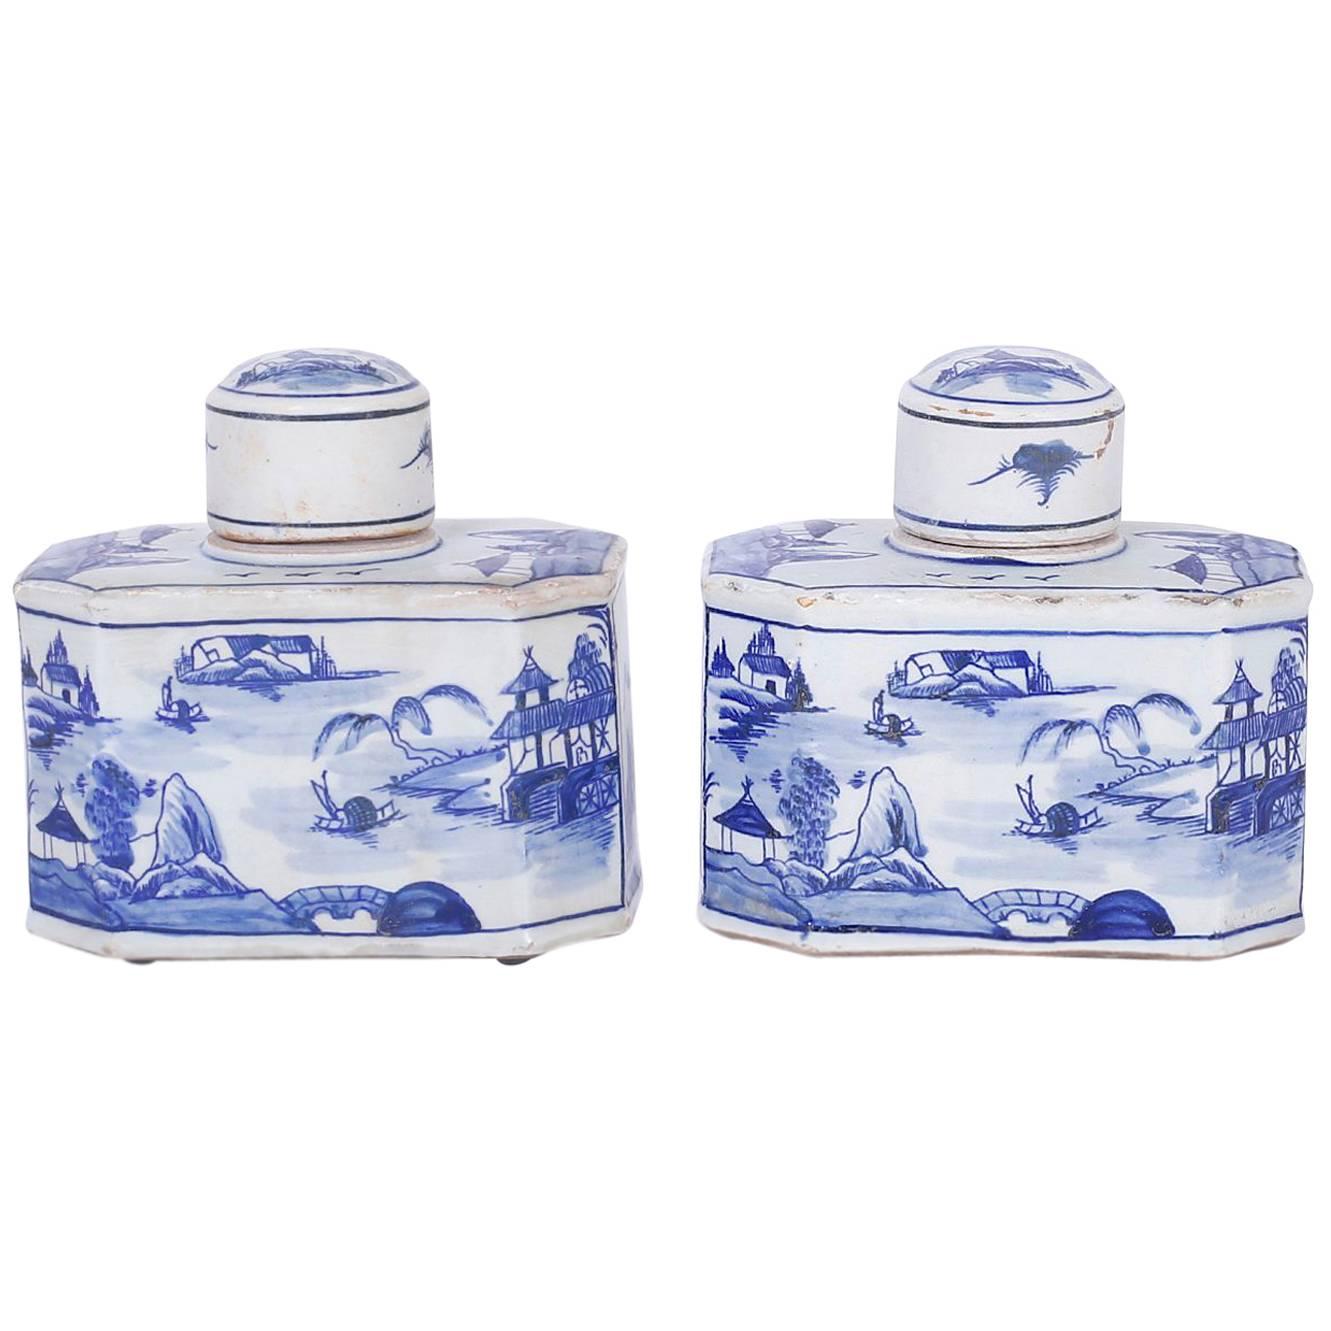 Pair of Blue and White Porcelain Tea Containers